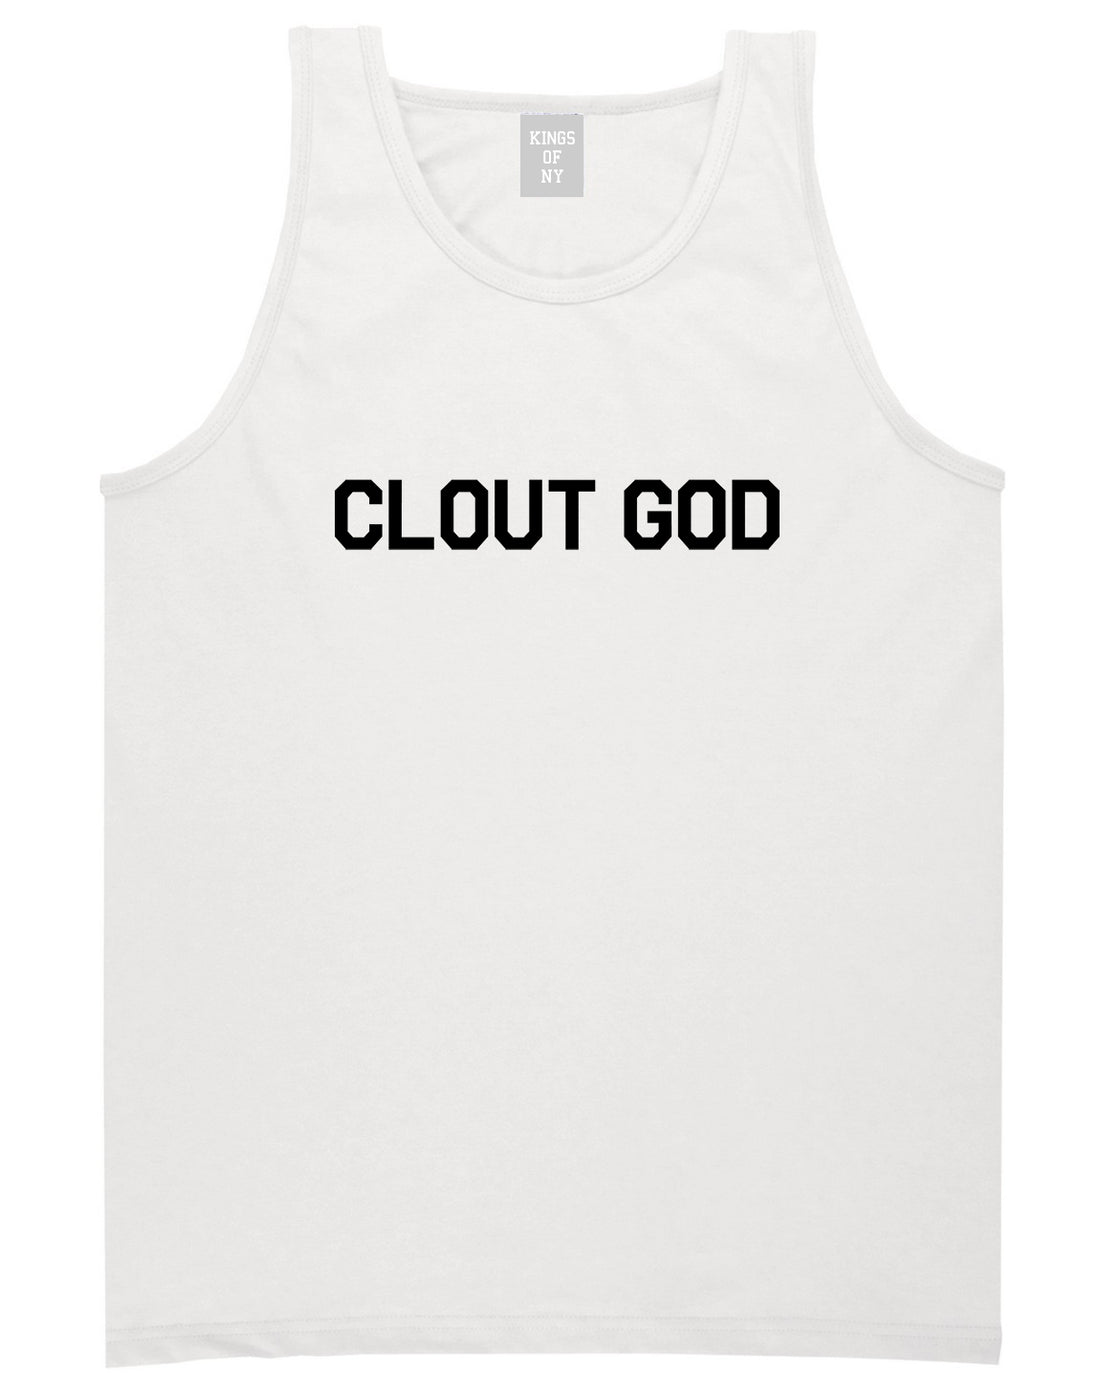 Clout God Mens Tank Top Shirt White by Kings Of NY